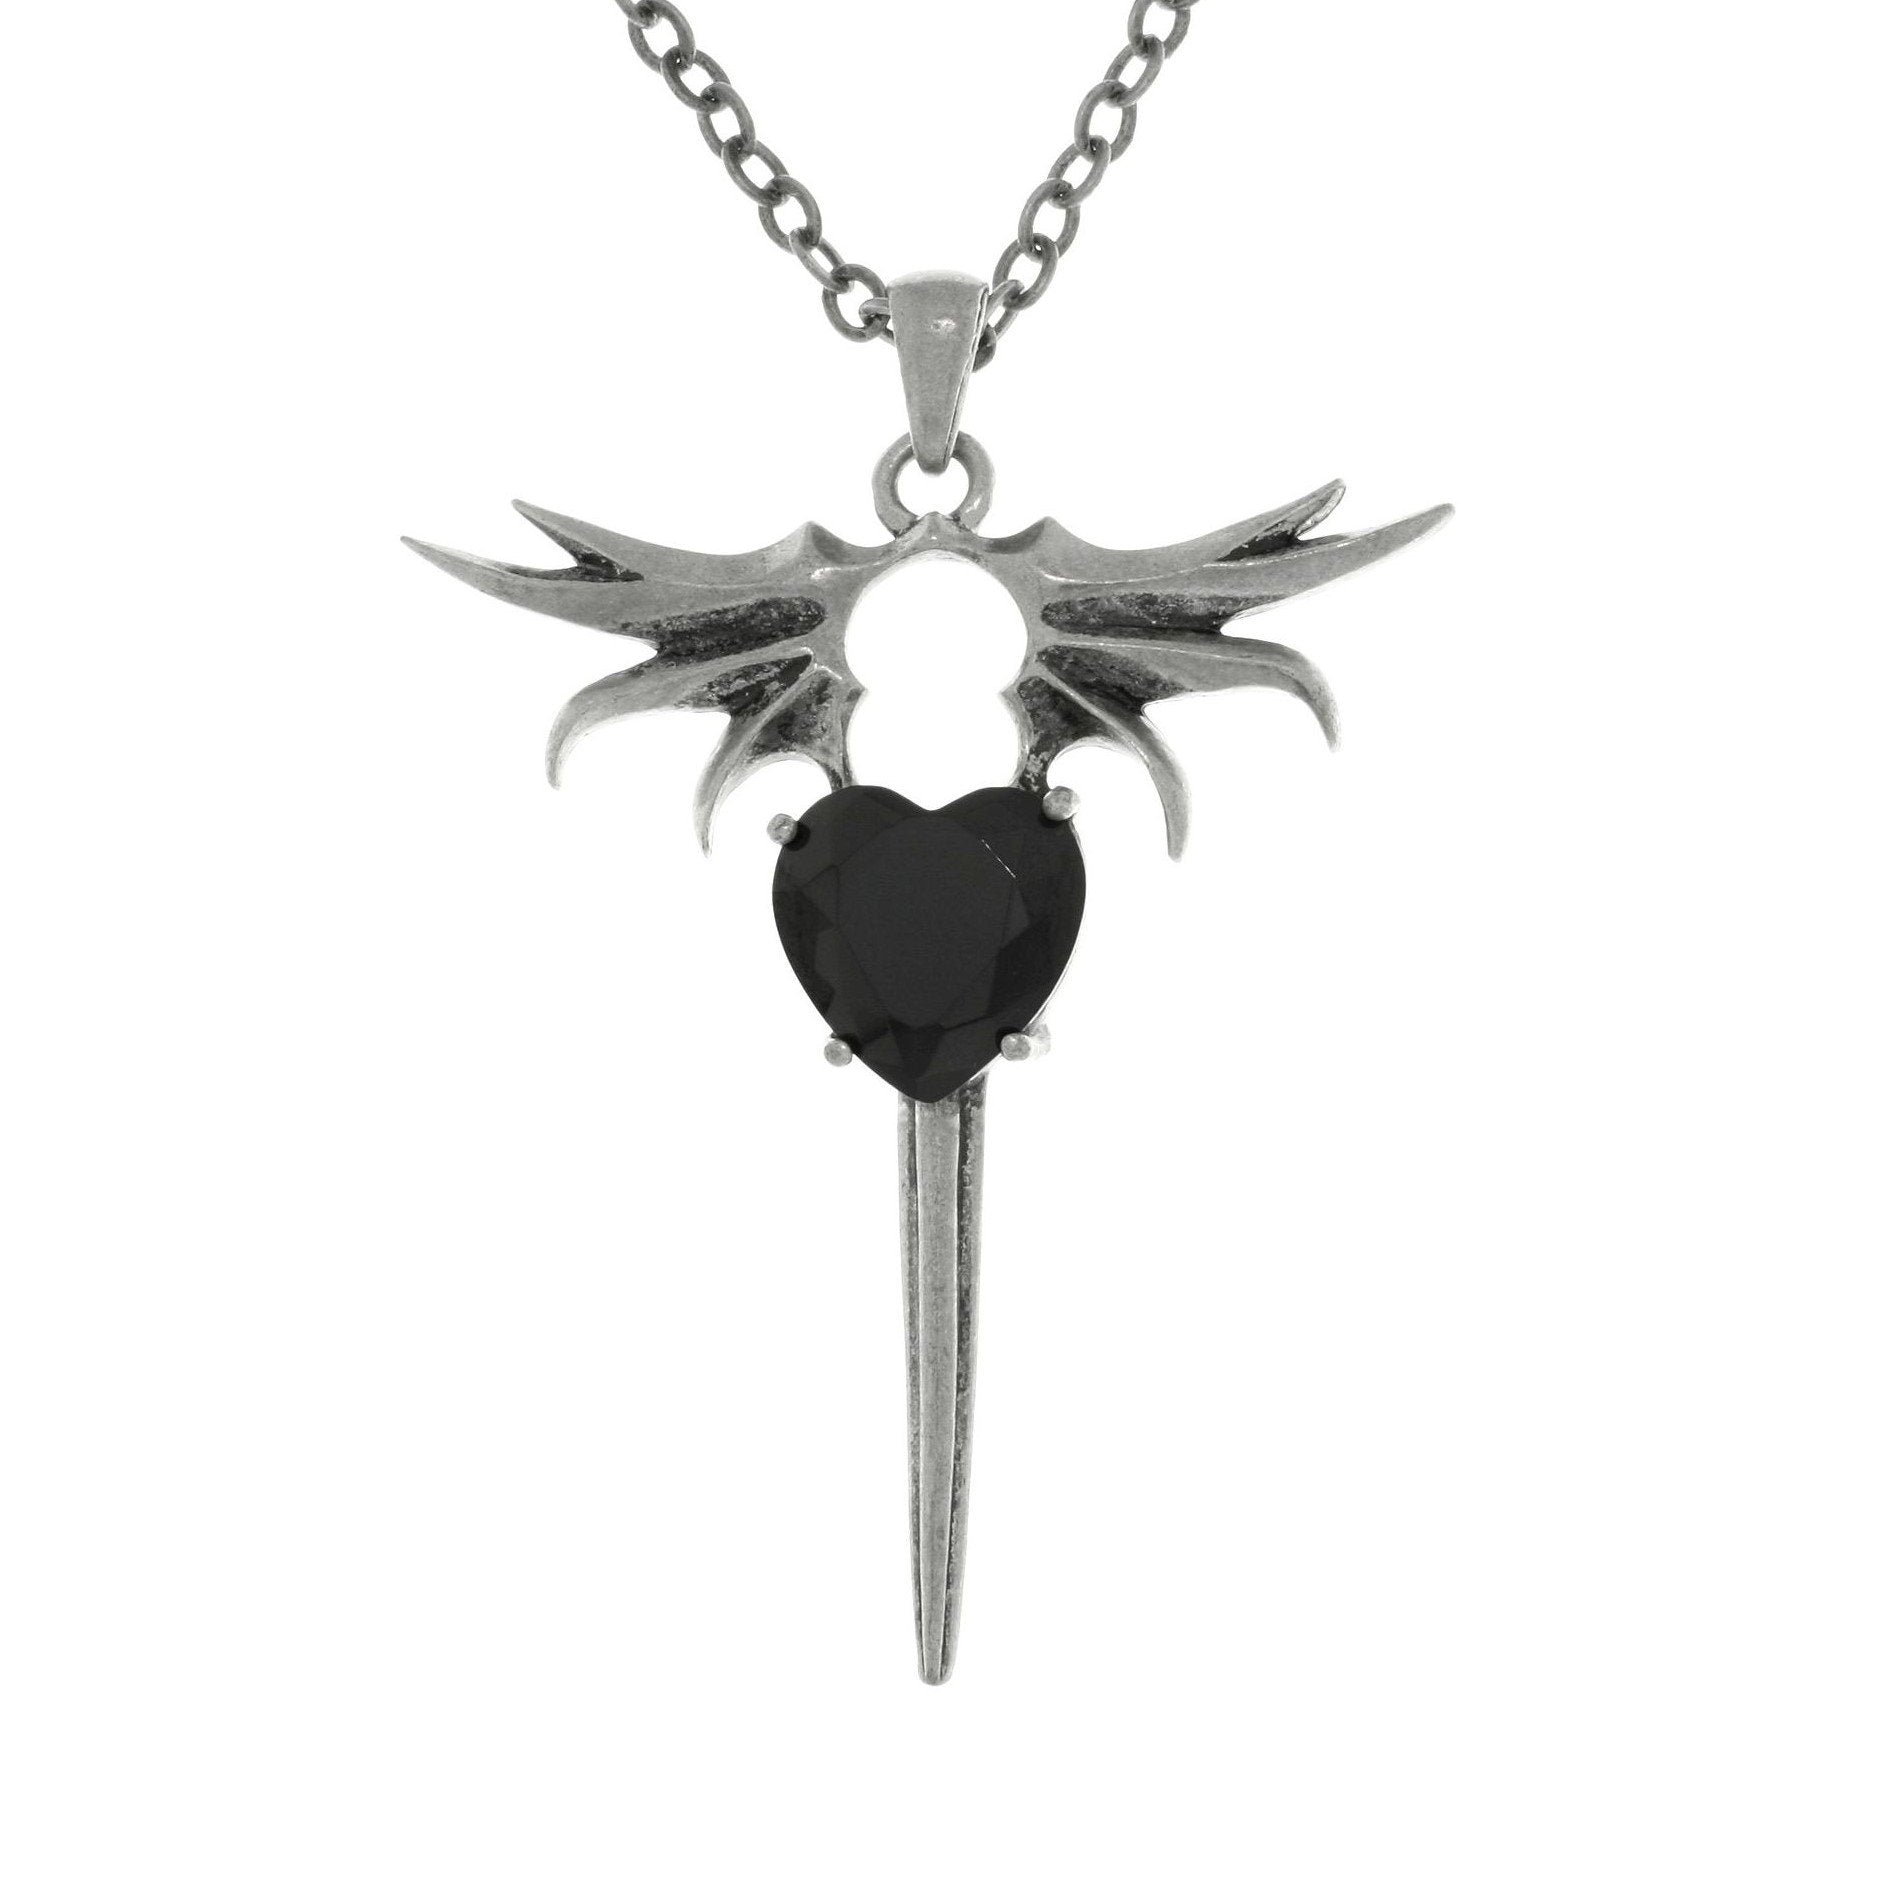 Dragon Wing Necklace - Pewter Black Crystal Heart with Wings Pendant on Chain Link Necklace